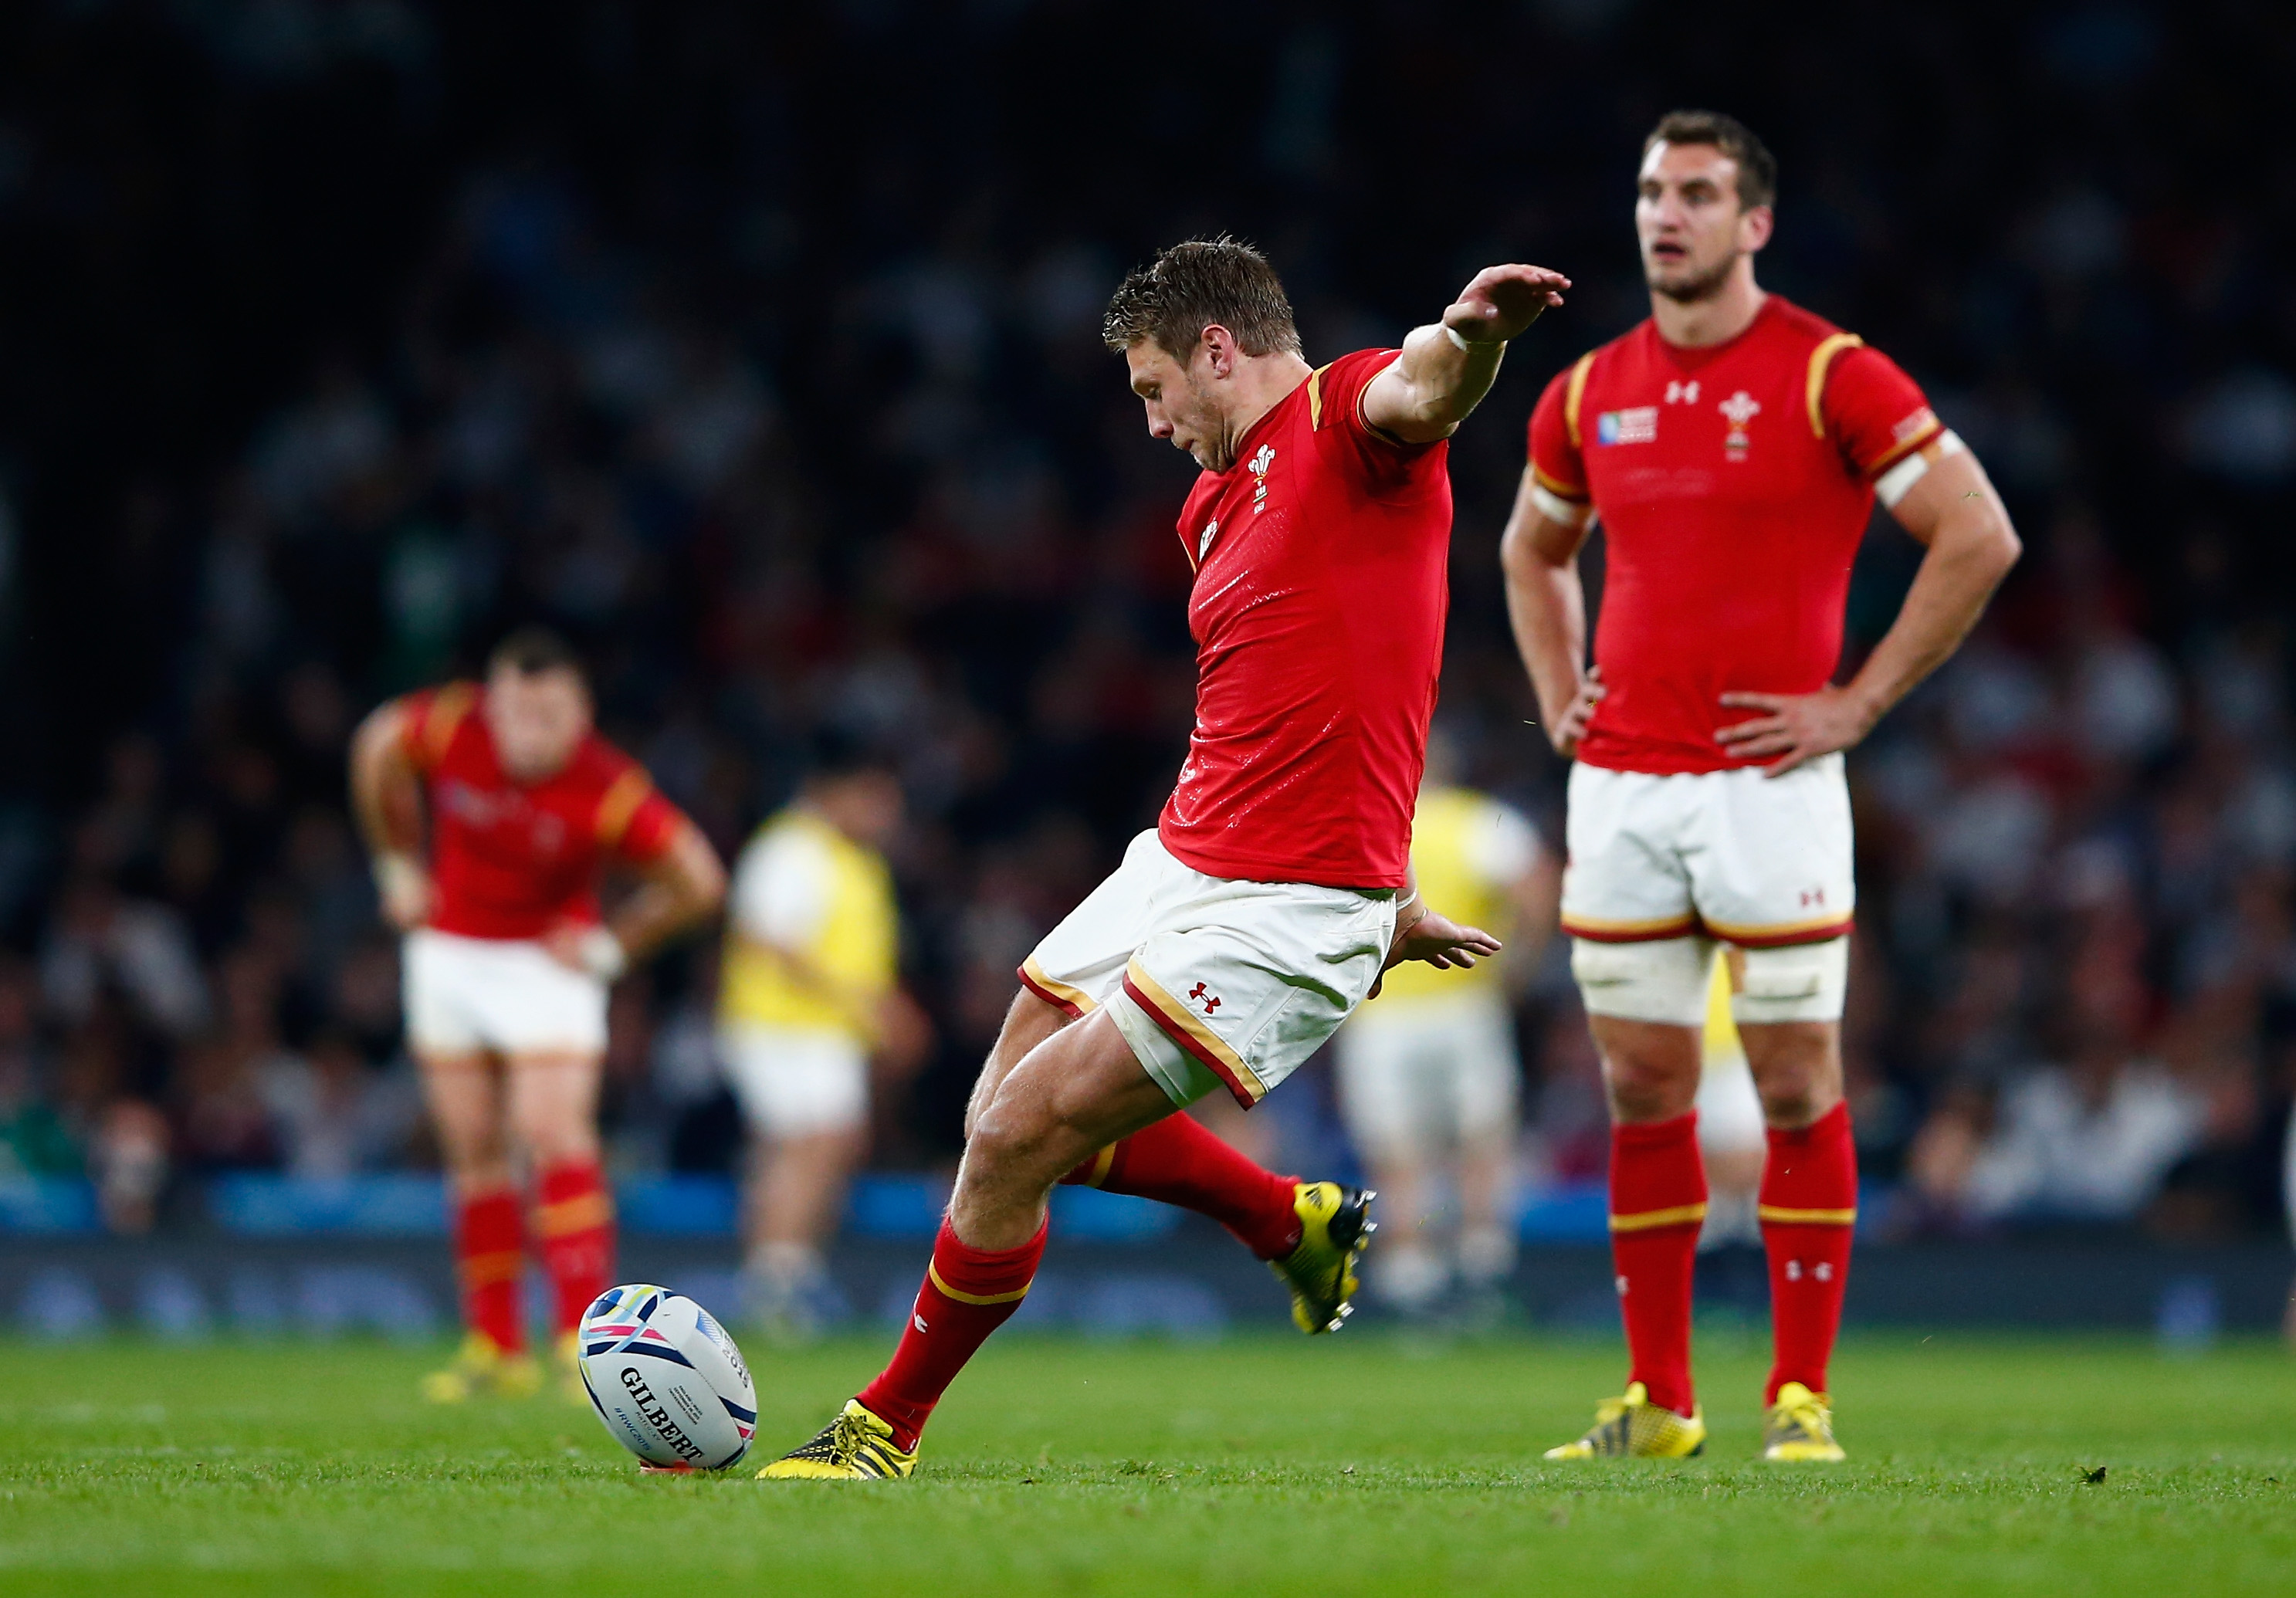 LONDON, ENGLAND - SEPTEMBER 26: Dan Biggar of Wales kicks a penalty during the 2015 Rugby World Cup Pool A match between England and Wales at Twickenham Stadium on September 26, 2015 in London, United Kingdom. (Photo by Shaun Botterill/Getty Images)